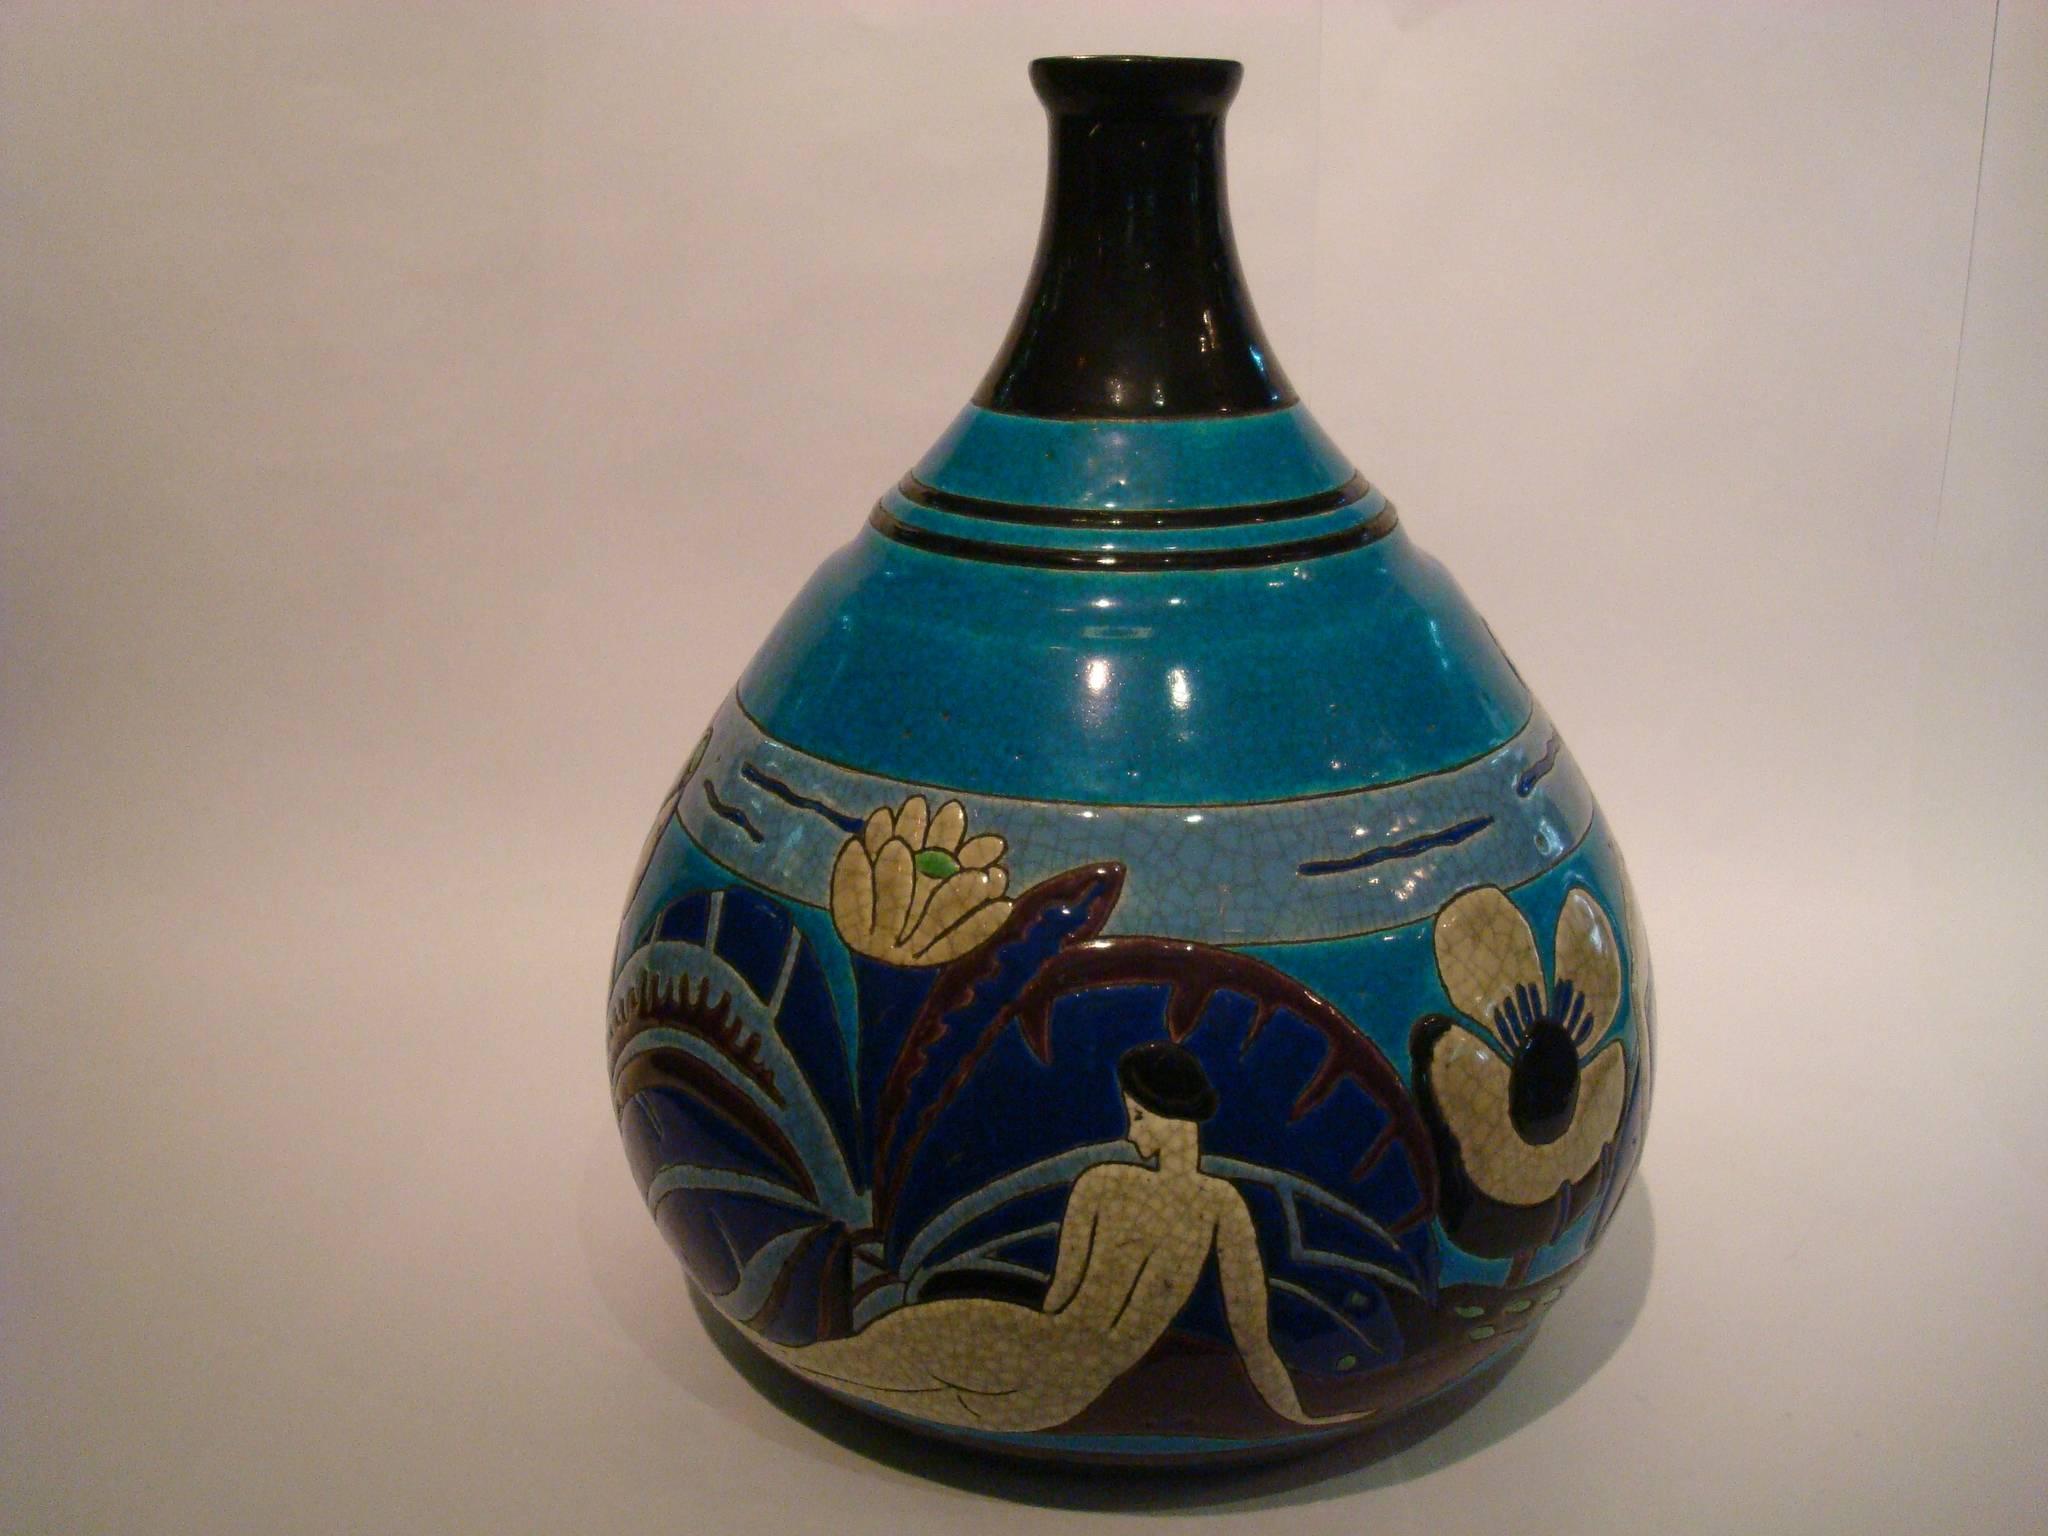 Atelier primavera longwy Baigneuses Faience Art Deco vase, French, circa 1930.
A Longwy pottery vase. Manufactured for Primavera, decorated in craquelure glazes with female bathers, nudes in garden on crackled blue ground. Earthenware, ceramic with